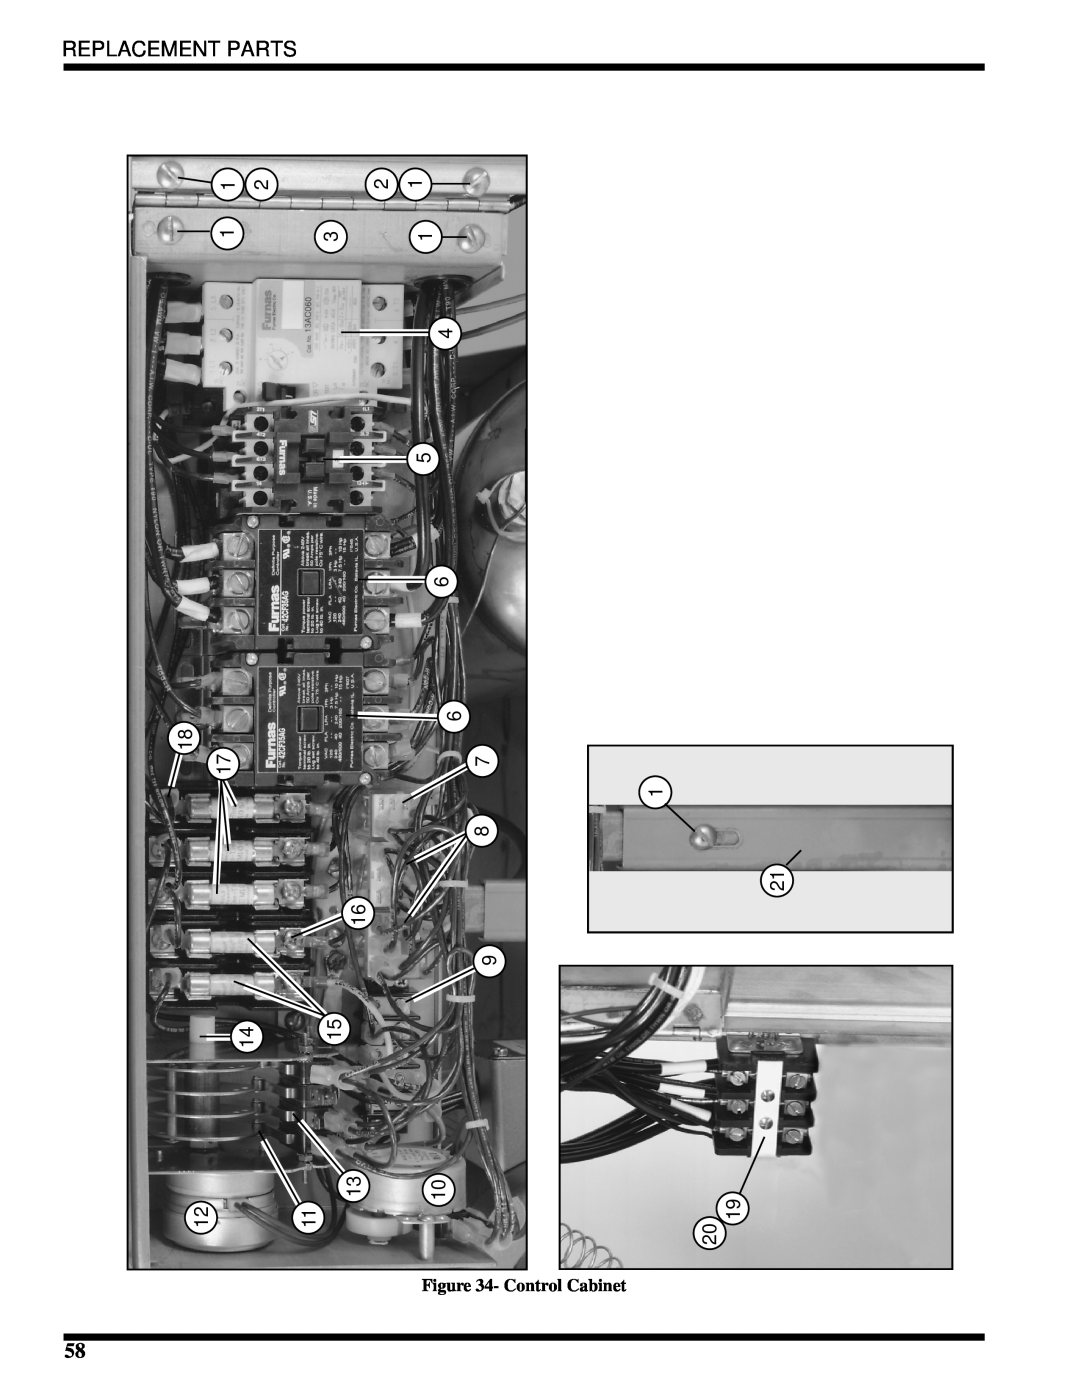 Moyer Diebel MH-6NM2, MH-60M2, MH-6LM2 technical manual Replacement Parts, 1419 1520, Control Cabinet 